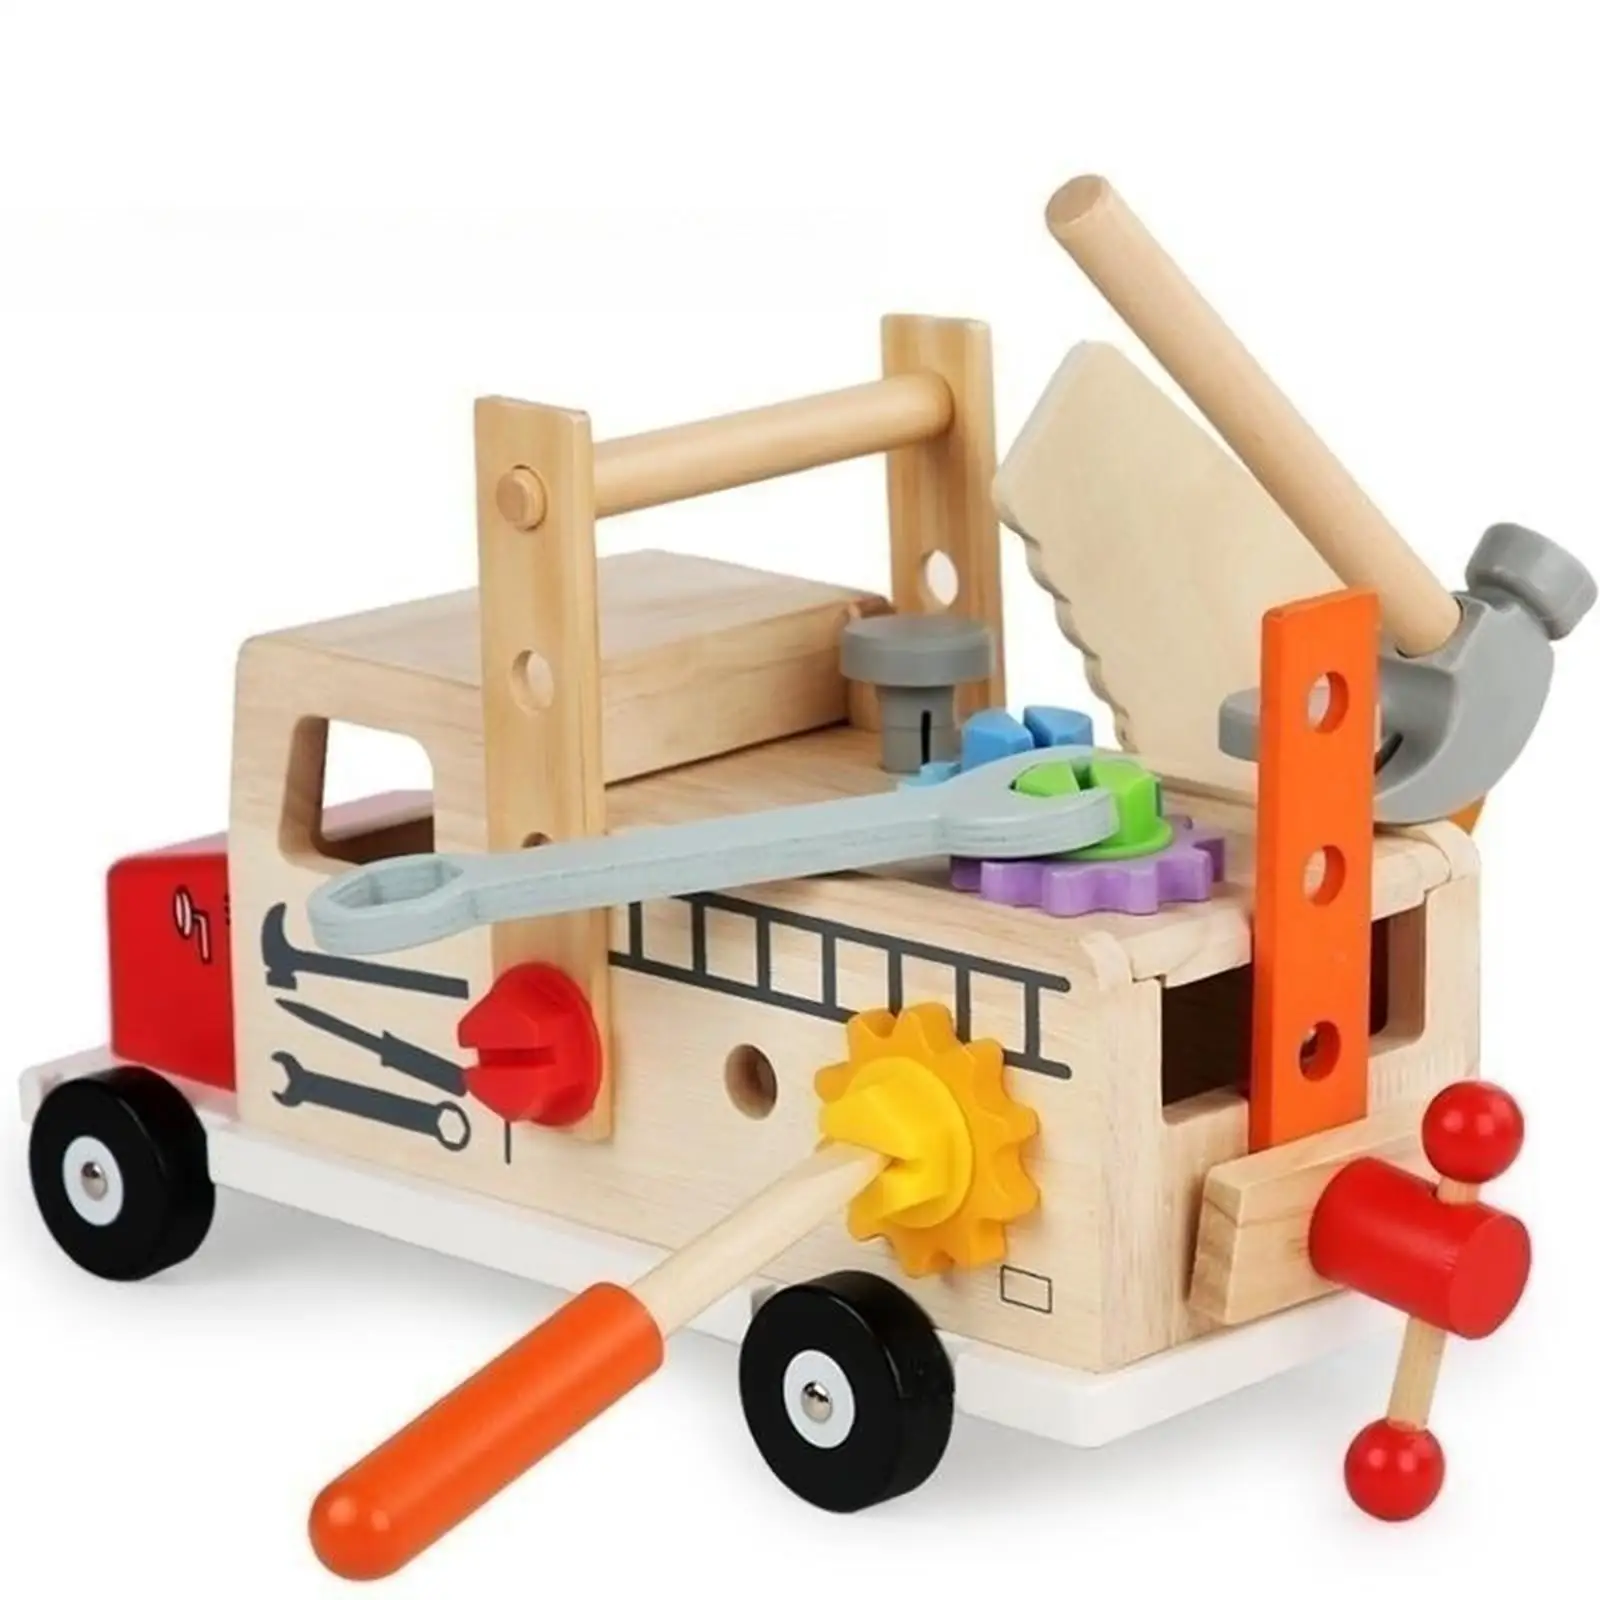 Wood Kids Tool Set Stem Construction Toy Tool Set for Toddlers for 3 4 5 6 Years Old Kids Boys Girls Children Xmas Present